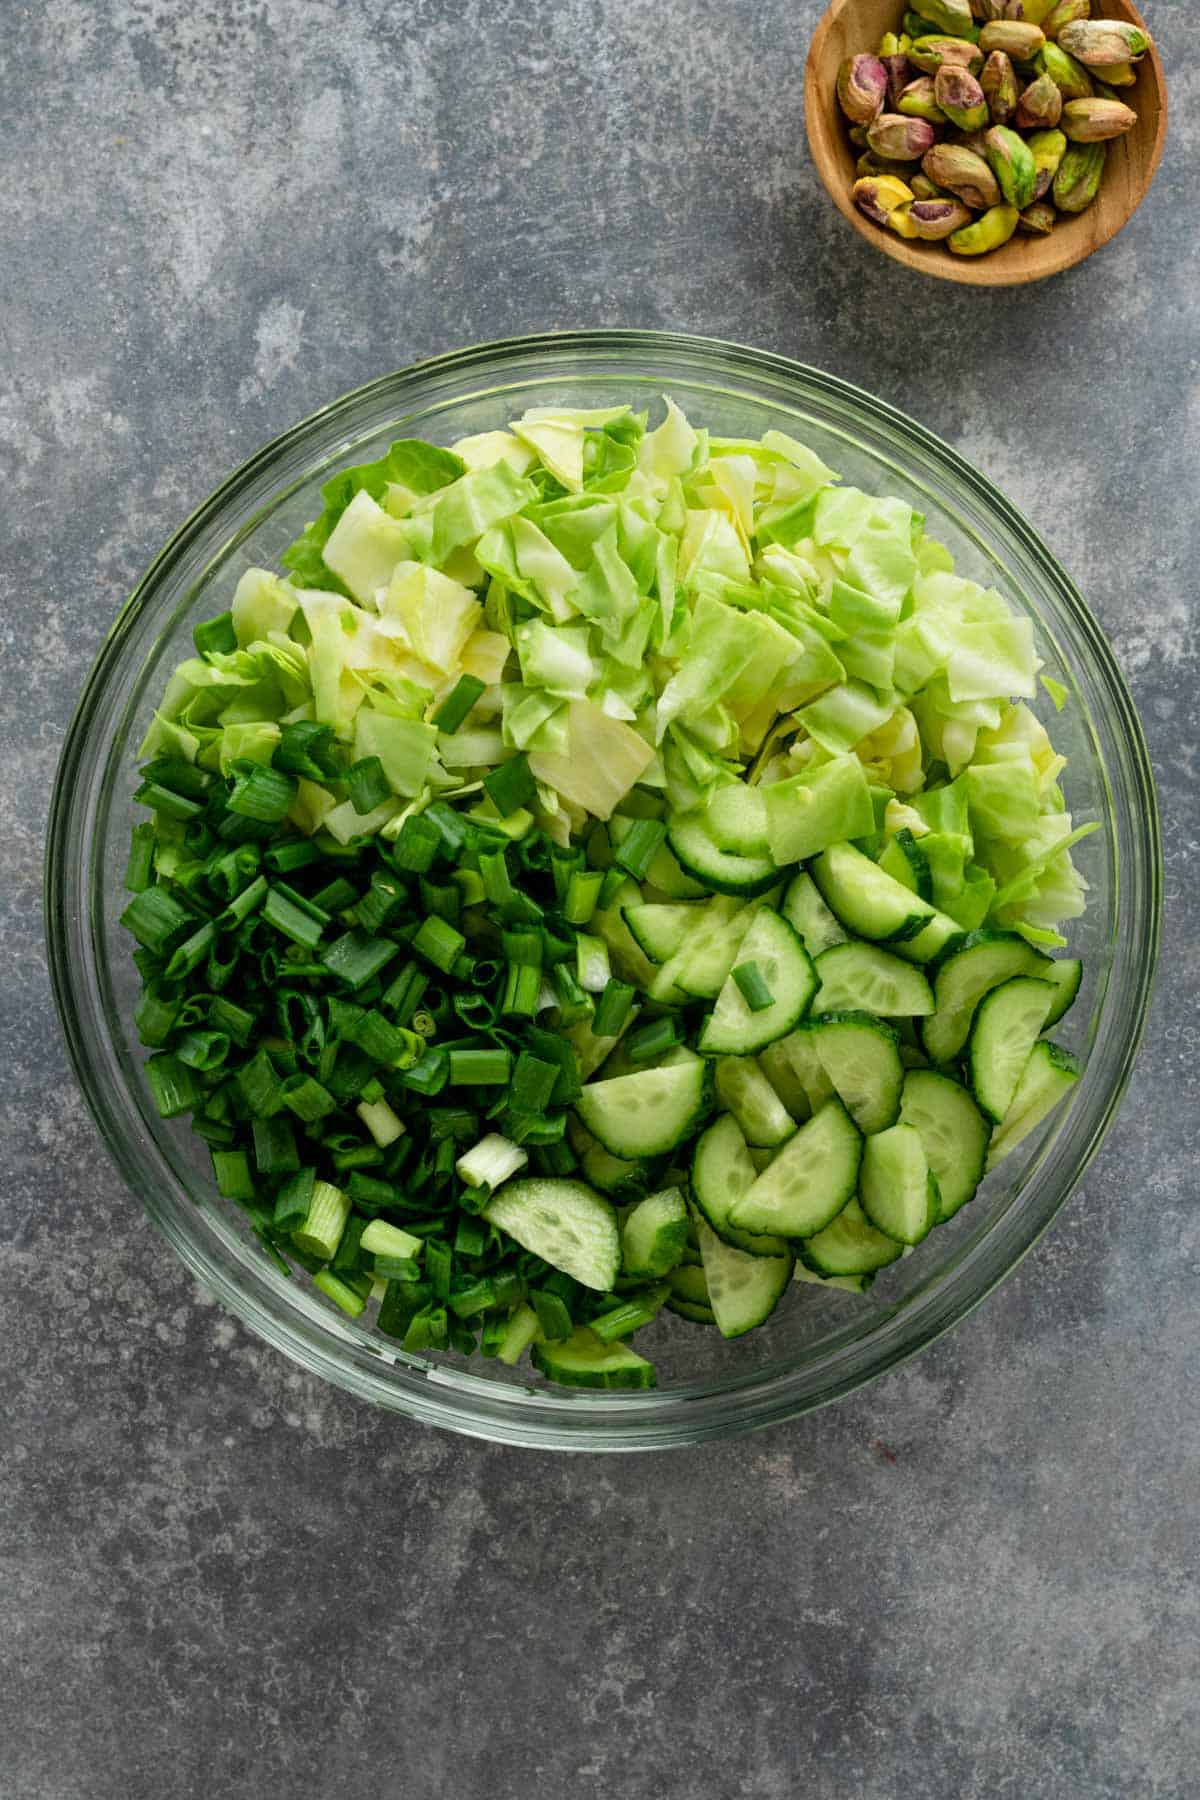 cucumbers, green onions, cabbage in a mixing bowl